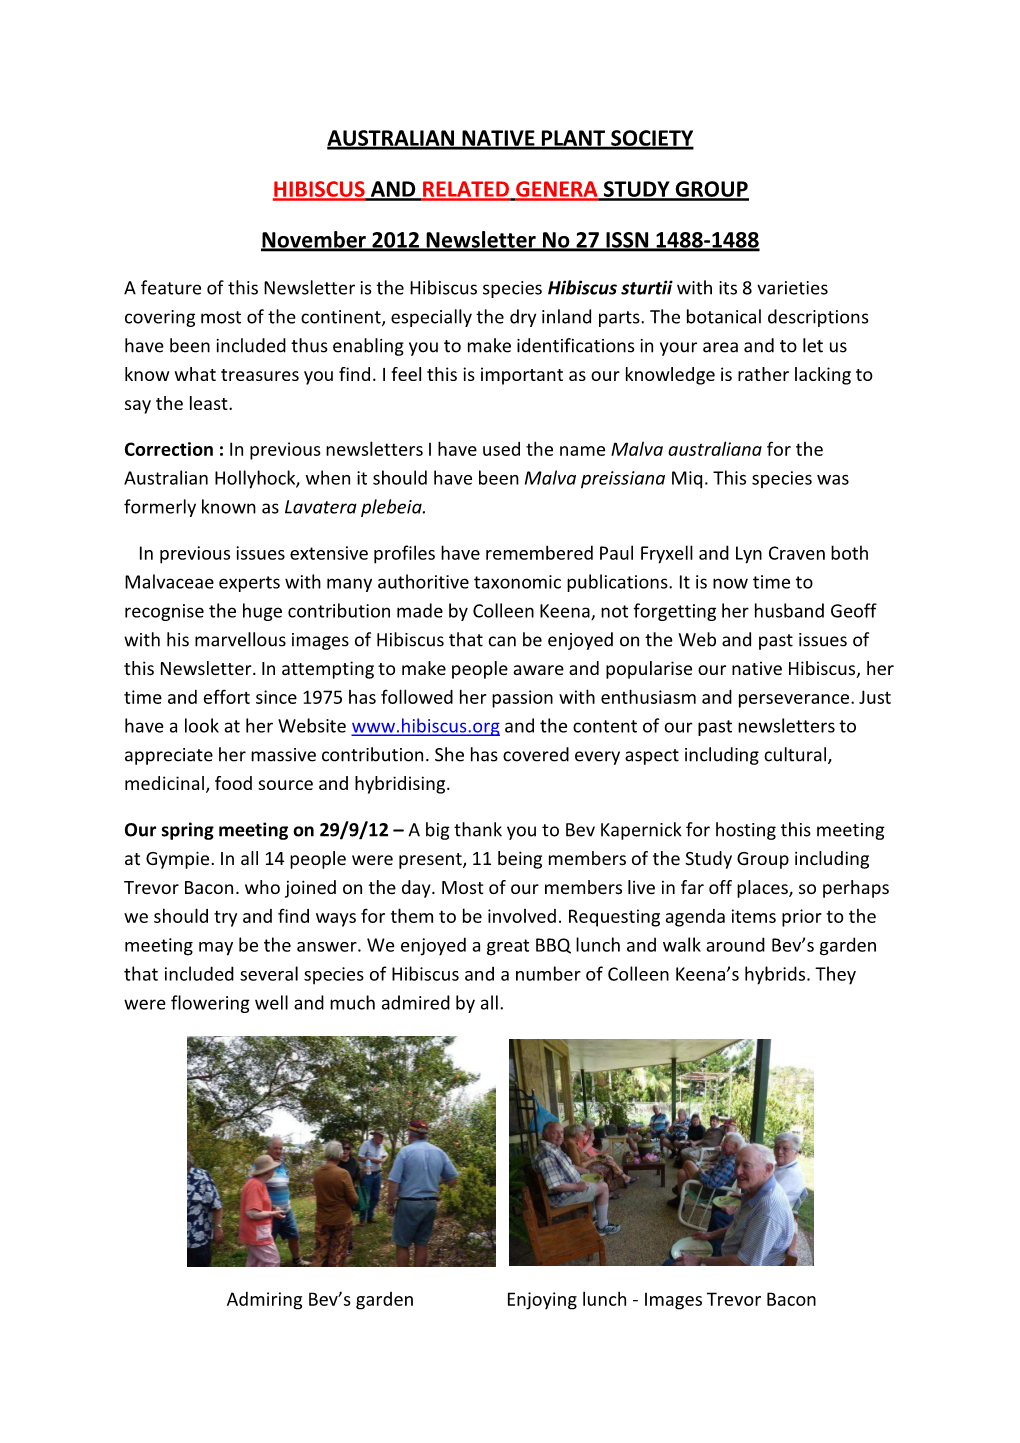 AUSTRALIAN NATIVE PLANT SOCIETY HIBISCUS and RELATED GENERA STUDY GROUP November 2012 Newsletter No 27 ISSN 1488-1488